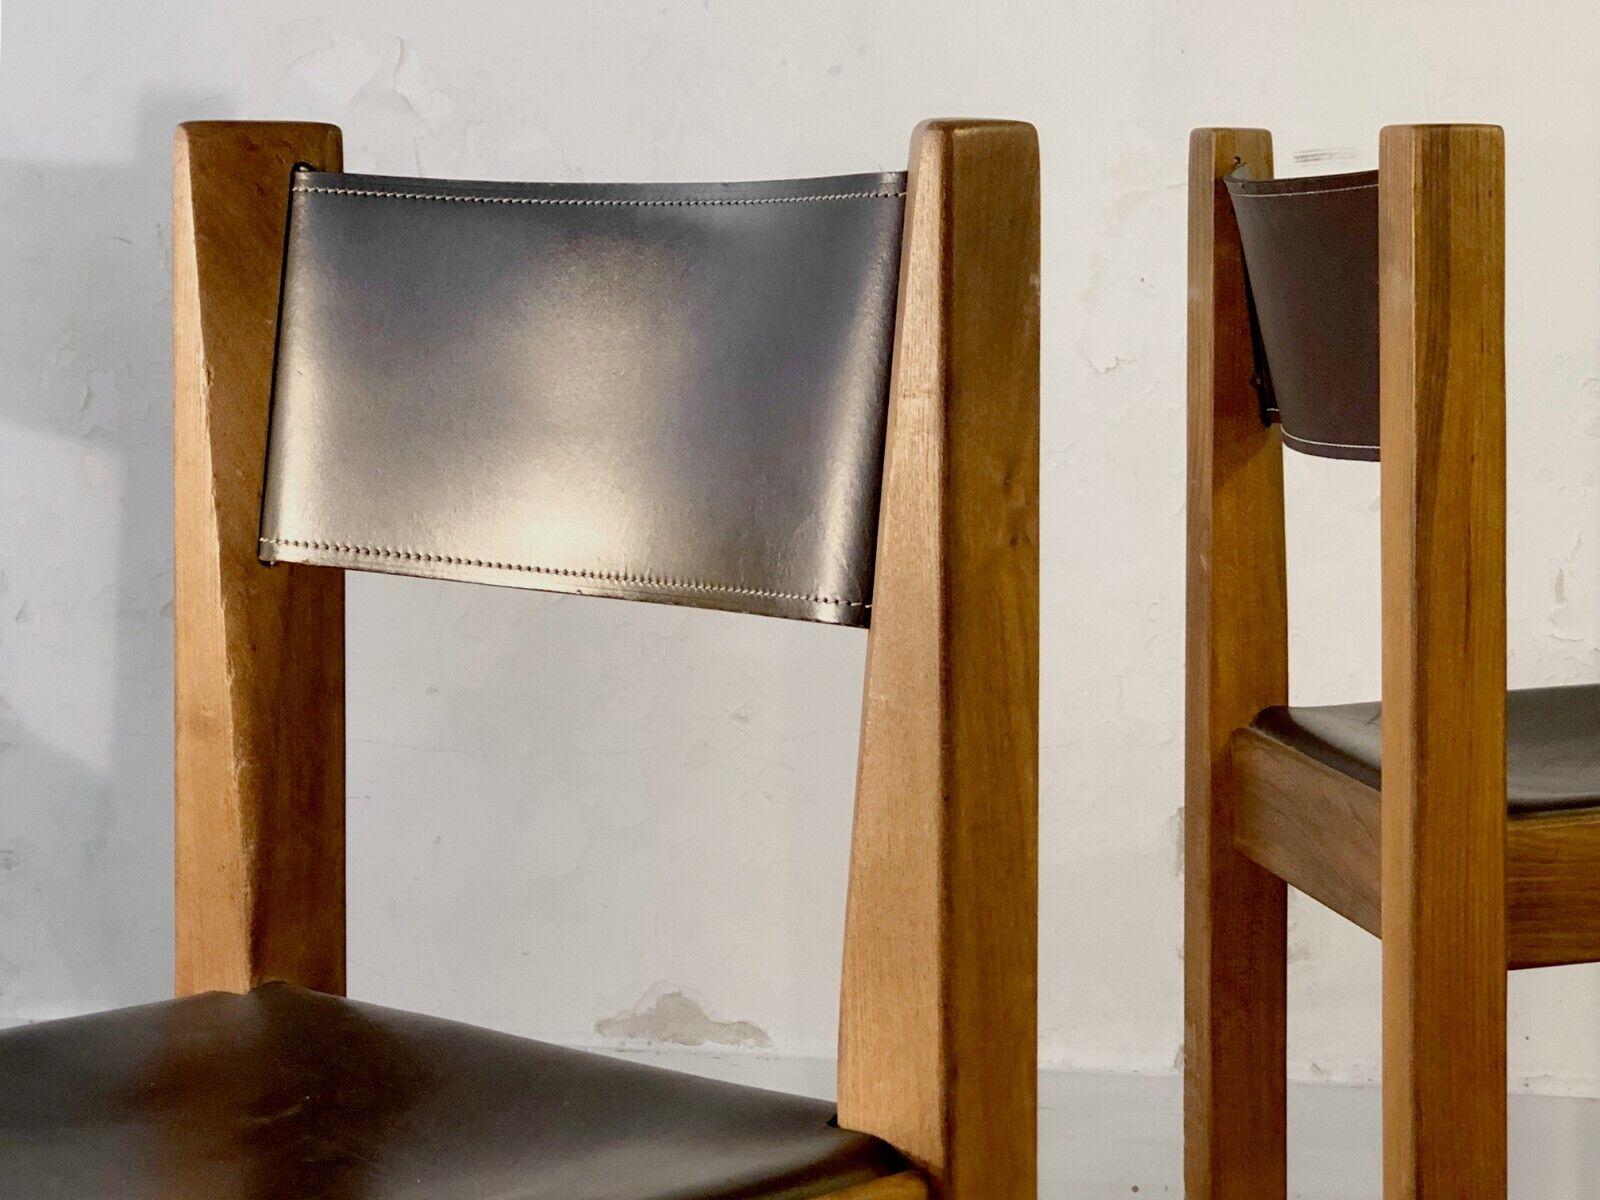 A powerful and rigorous set of 4 chairs in massive elm and dark brown leather, Modernist, Bauhaus, Constructivist, Forme Libre, geometrical structures in thick pieces of massive elm of a square section, with interior angles of the seat being